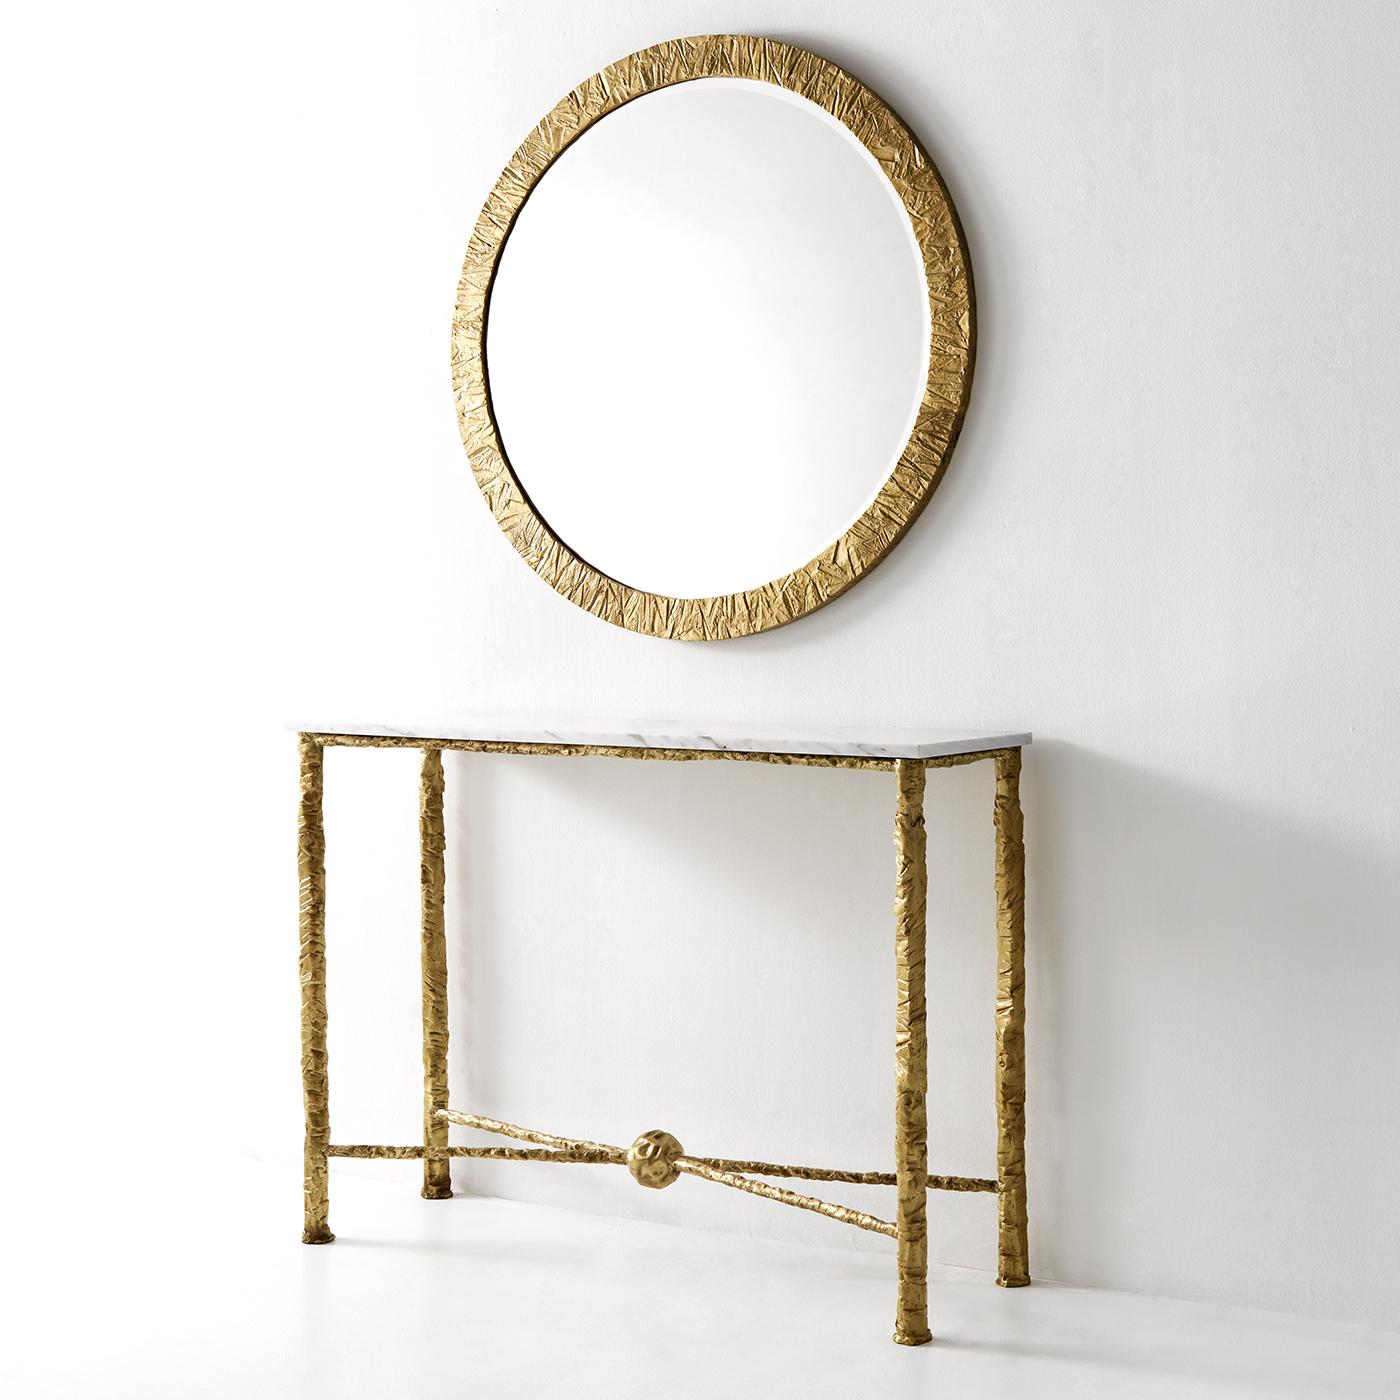 The Materia console table is a lavish piece with a white Calacatta marble top and a sturdy brass structure. Its finish is in natural brass with lacquer. This console table is an exquisite, chic, and fancy item and it is amazing to observe the